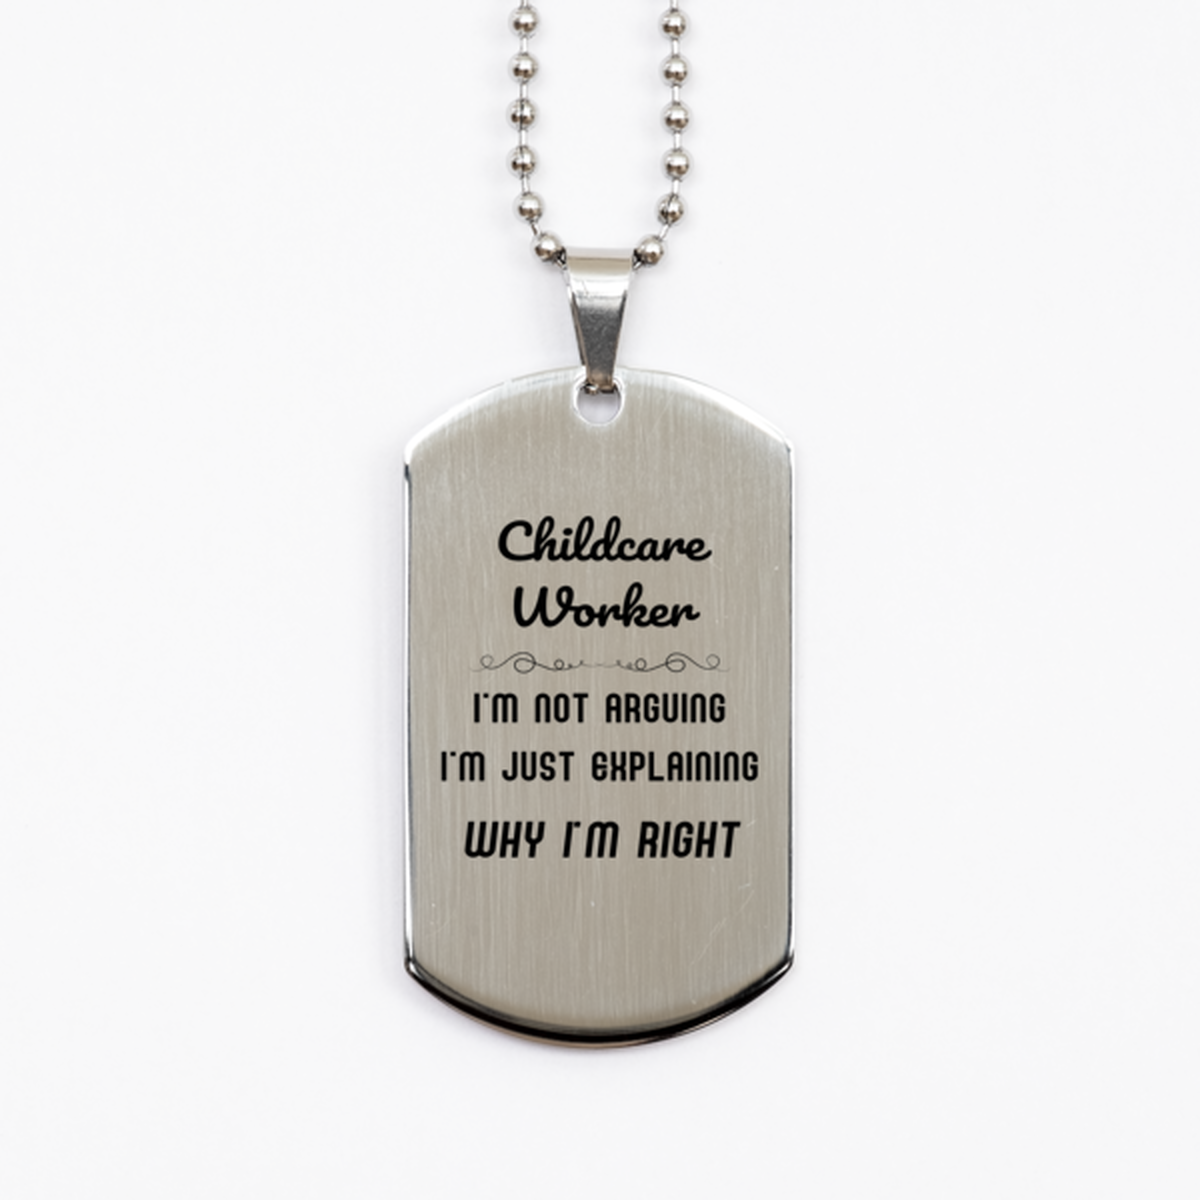 Childcare Worker I'm not Arguing. I'm Just Explaining Why I'm RIGHT Silver Dog Tag, Funny Saying Quote Childcare Worker Gifts For Childcare Worker Graduation Birthday Christmas Gifts for Men Women Coworker